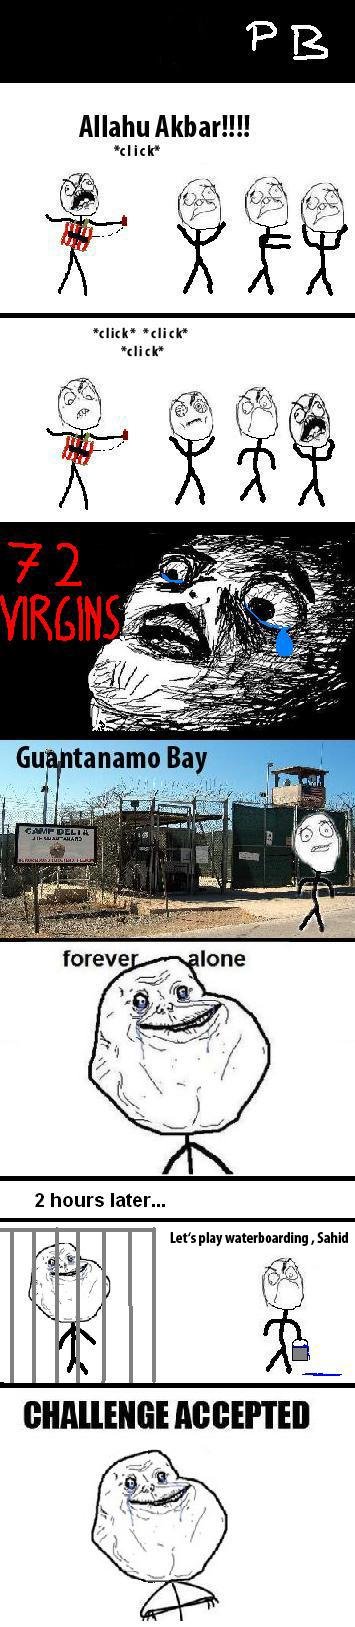 Yeeah Guantanamo Bay. . Allah: himelf i' "raep tees play , Enid. the name is big bob time for your meat sammich